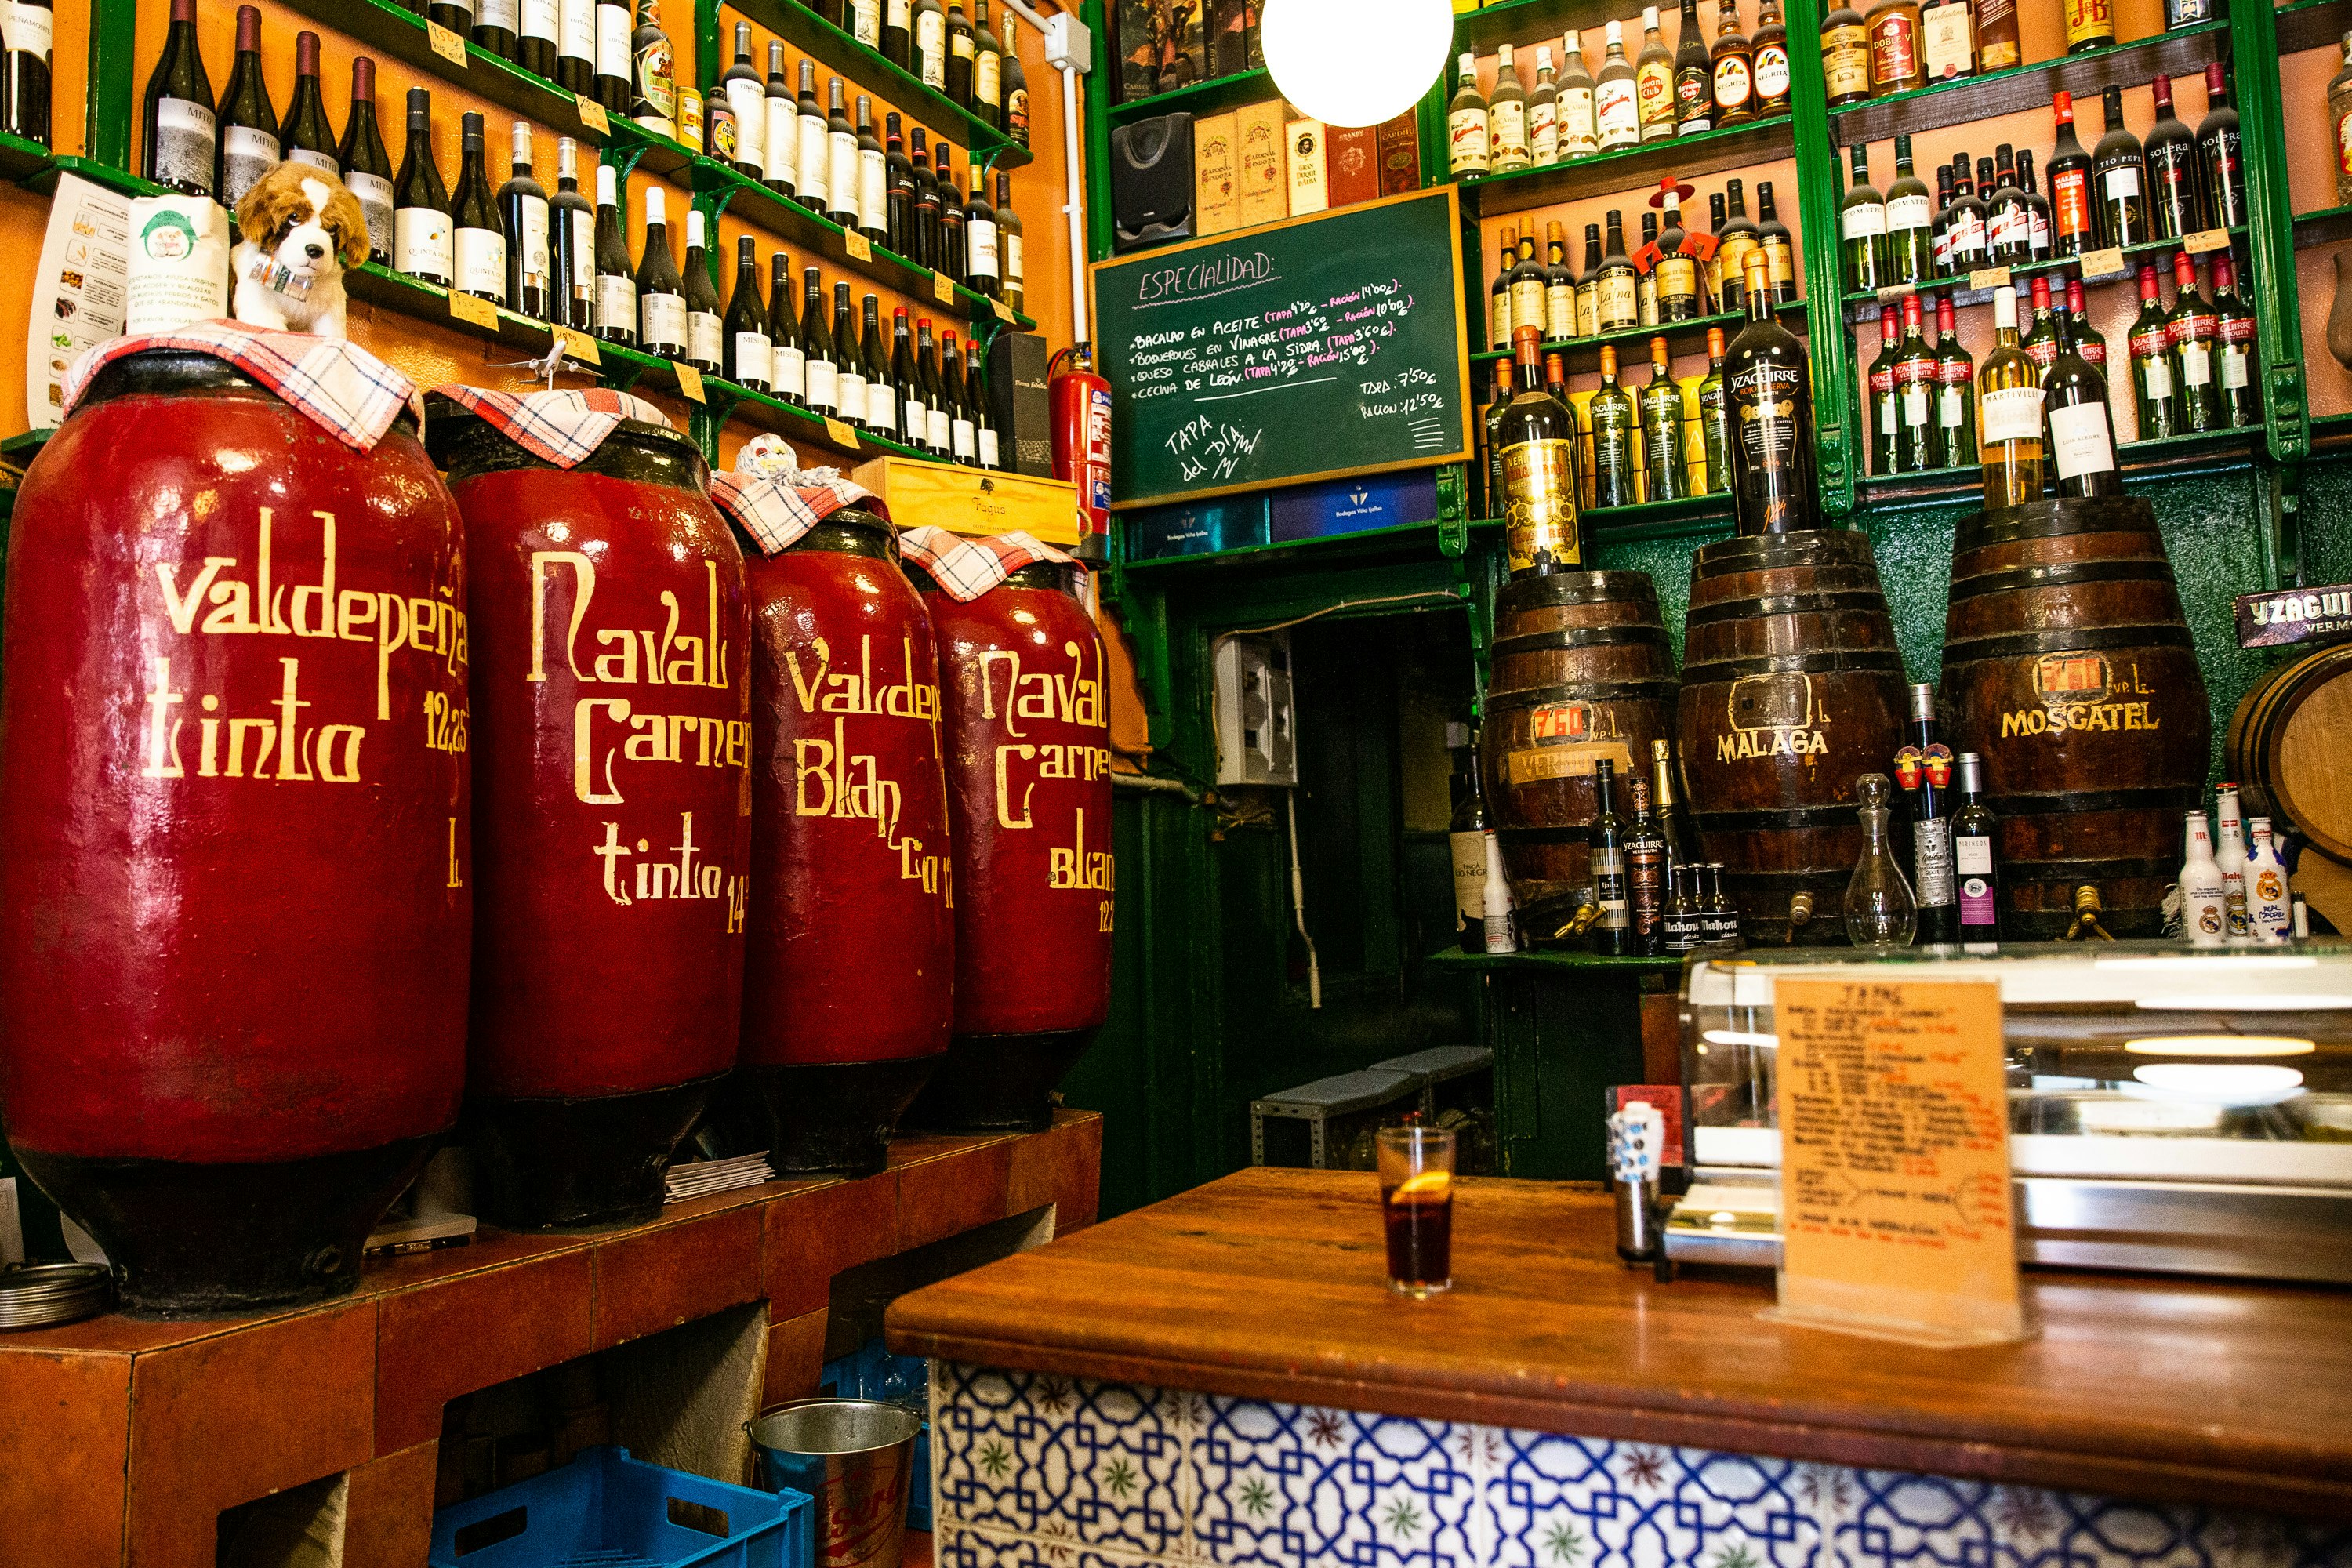 The interior of Bodegas Ricla, Madrid; the walls are lined with vats of wine, above which are green shelves packed with wine bottles.